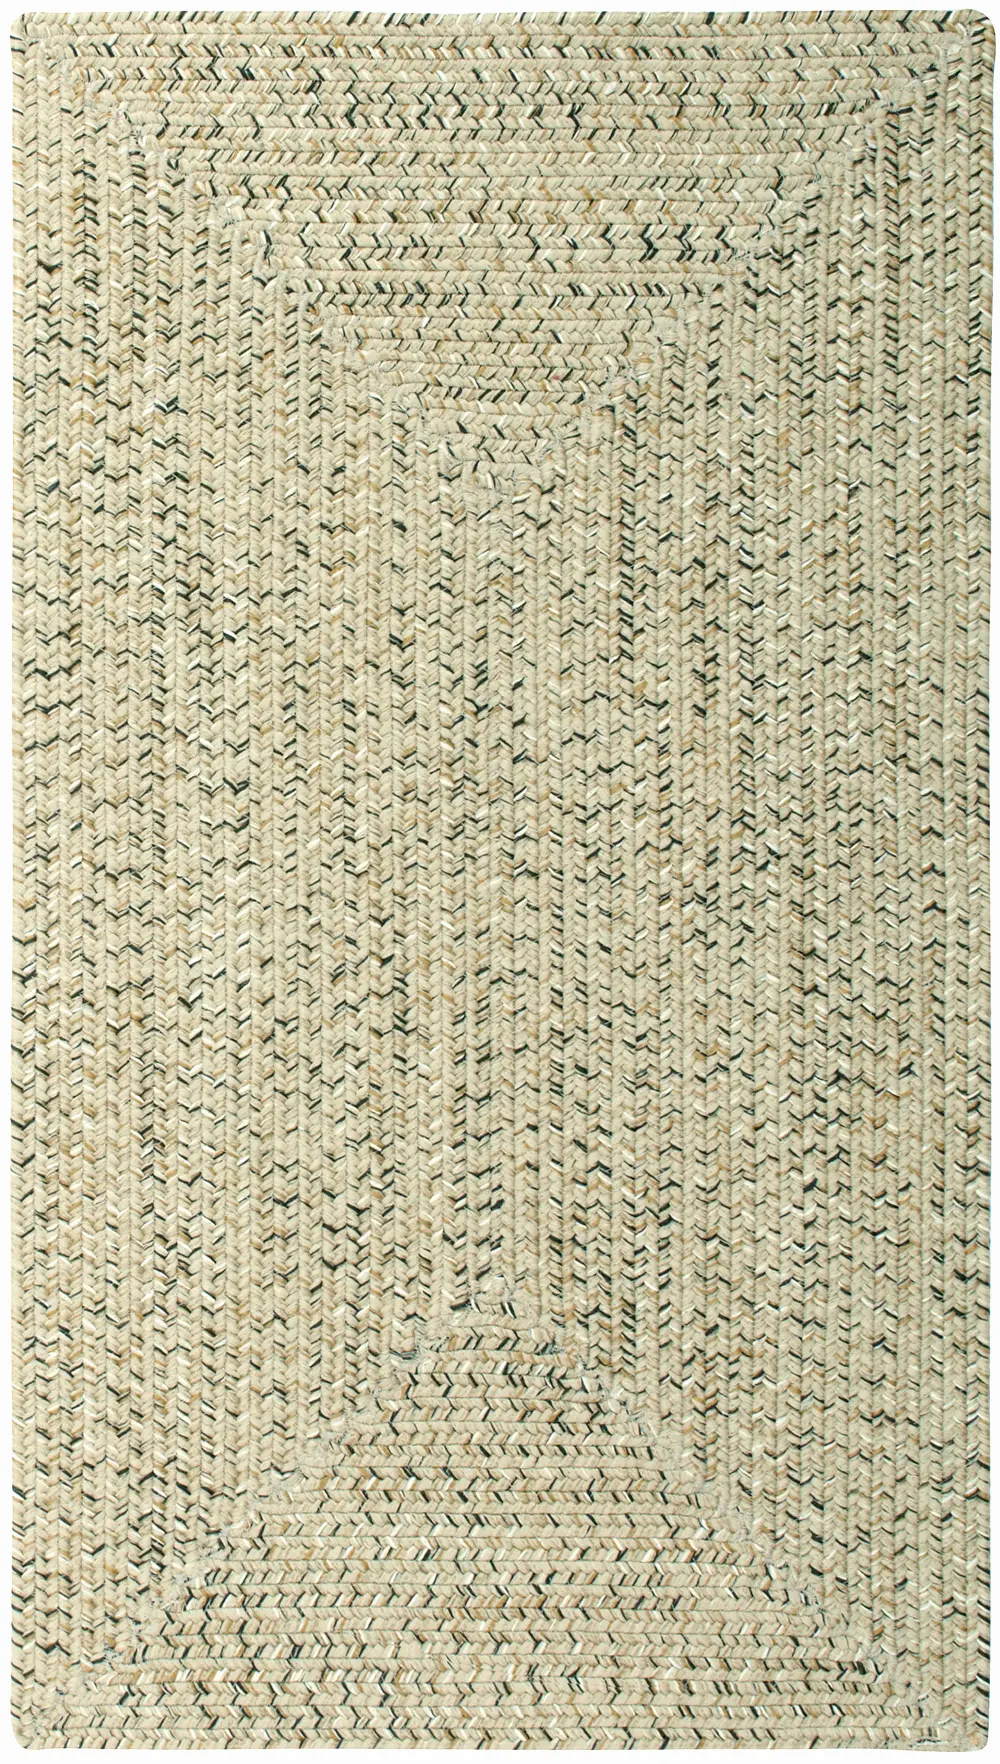 0110QS00200030600 XX-Small Shell Taupe Braided Indoor-Outdoor Rug - Sea Glass-1